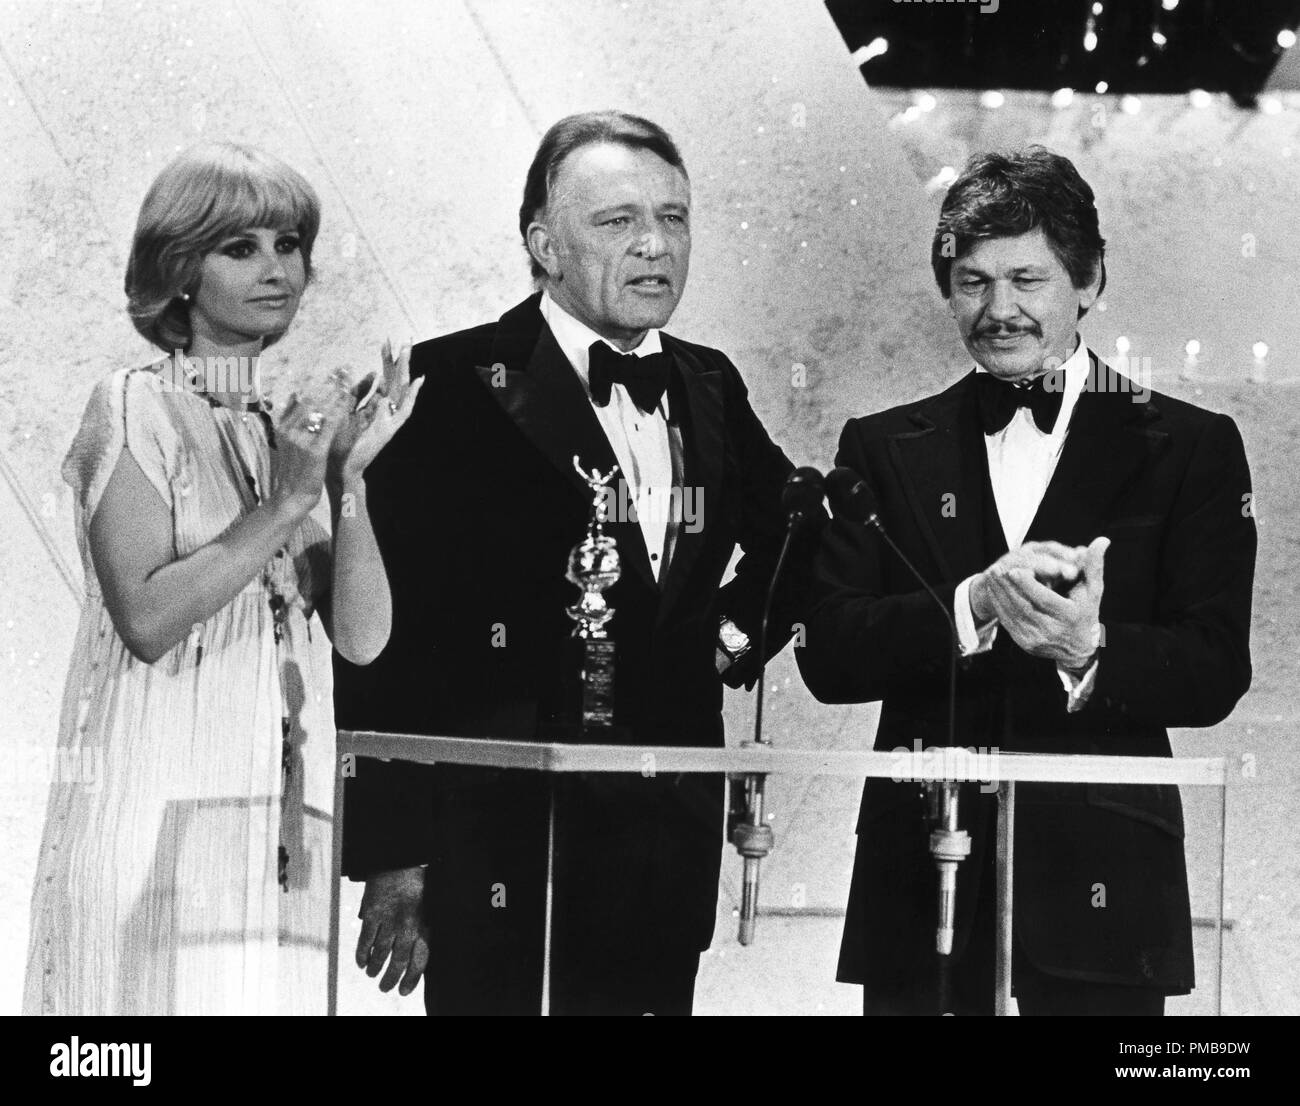 Jill Ireland, Richard Burton, Charles Bronson at the 35th Annual Golden Globe Awards, 1978 © JRC /The Hollywood Archive - All Rights Reserved File Reference # 32557 712THA Stock Photo